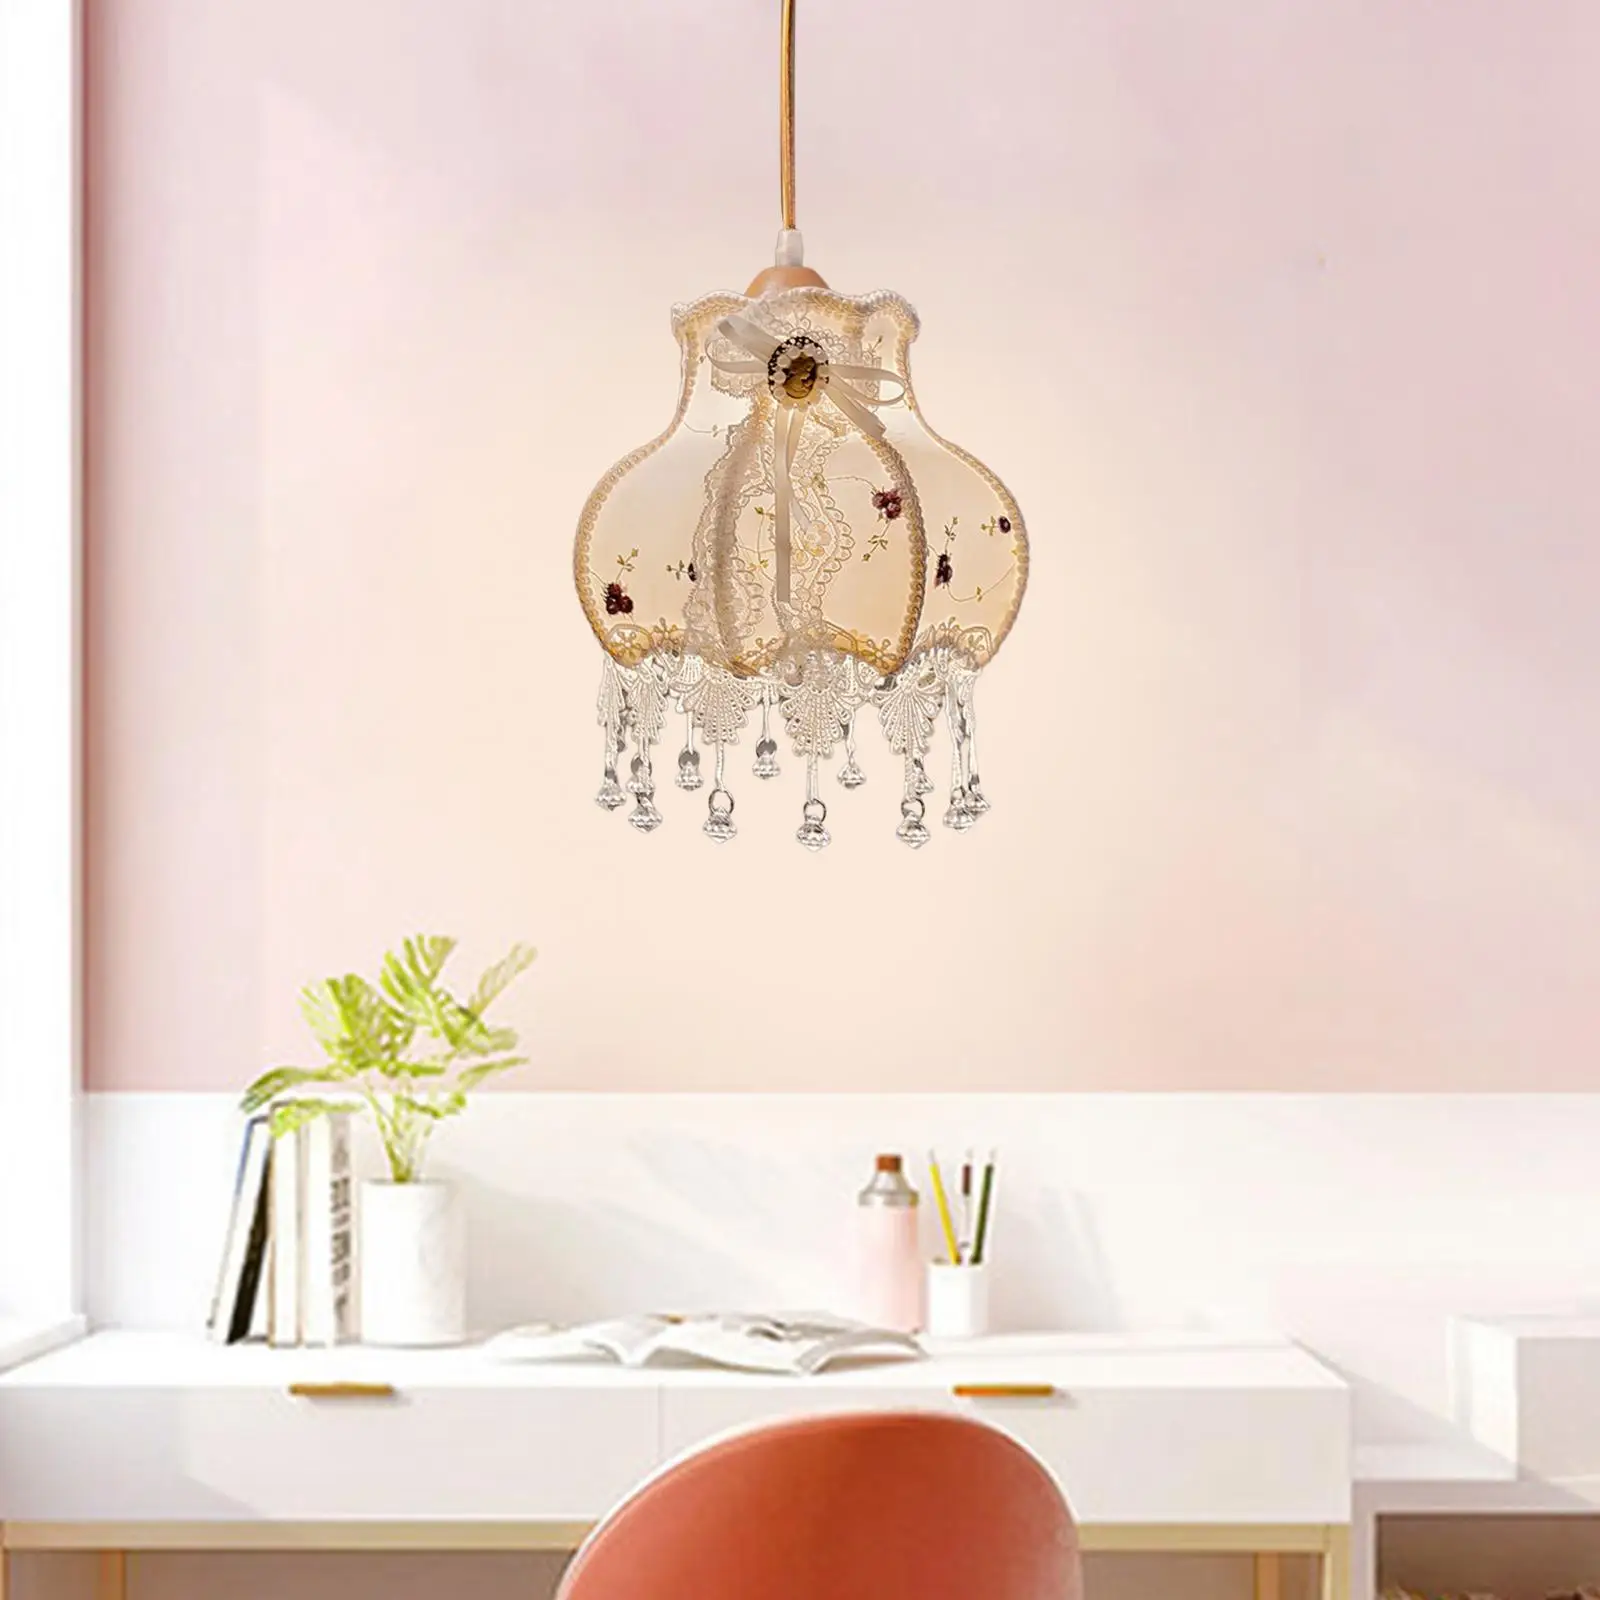 Ceiling Hanging Lamp Shade E27 Retro Elegant Lights Cover Ceiling Lantern Cover for Hallway Home Dining Room Bedroom Entryway